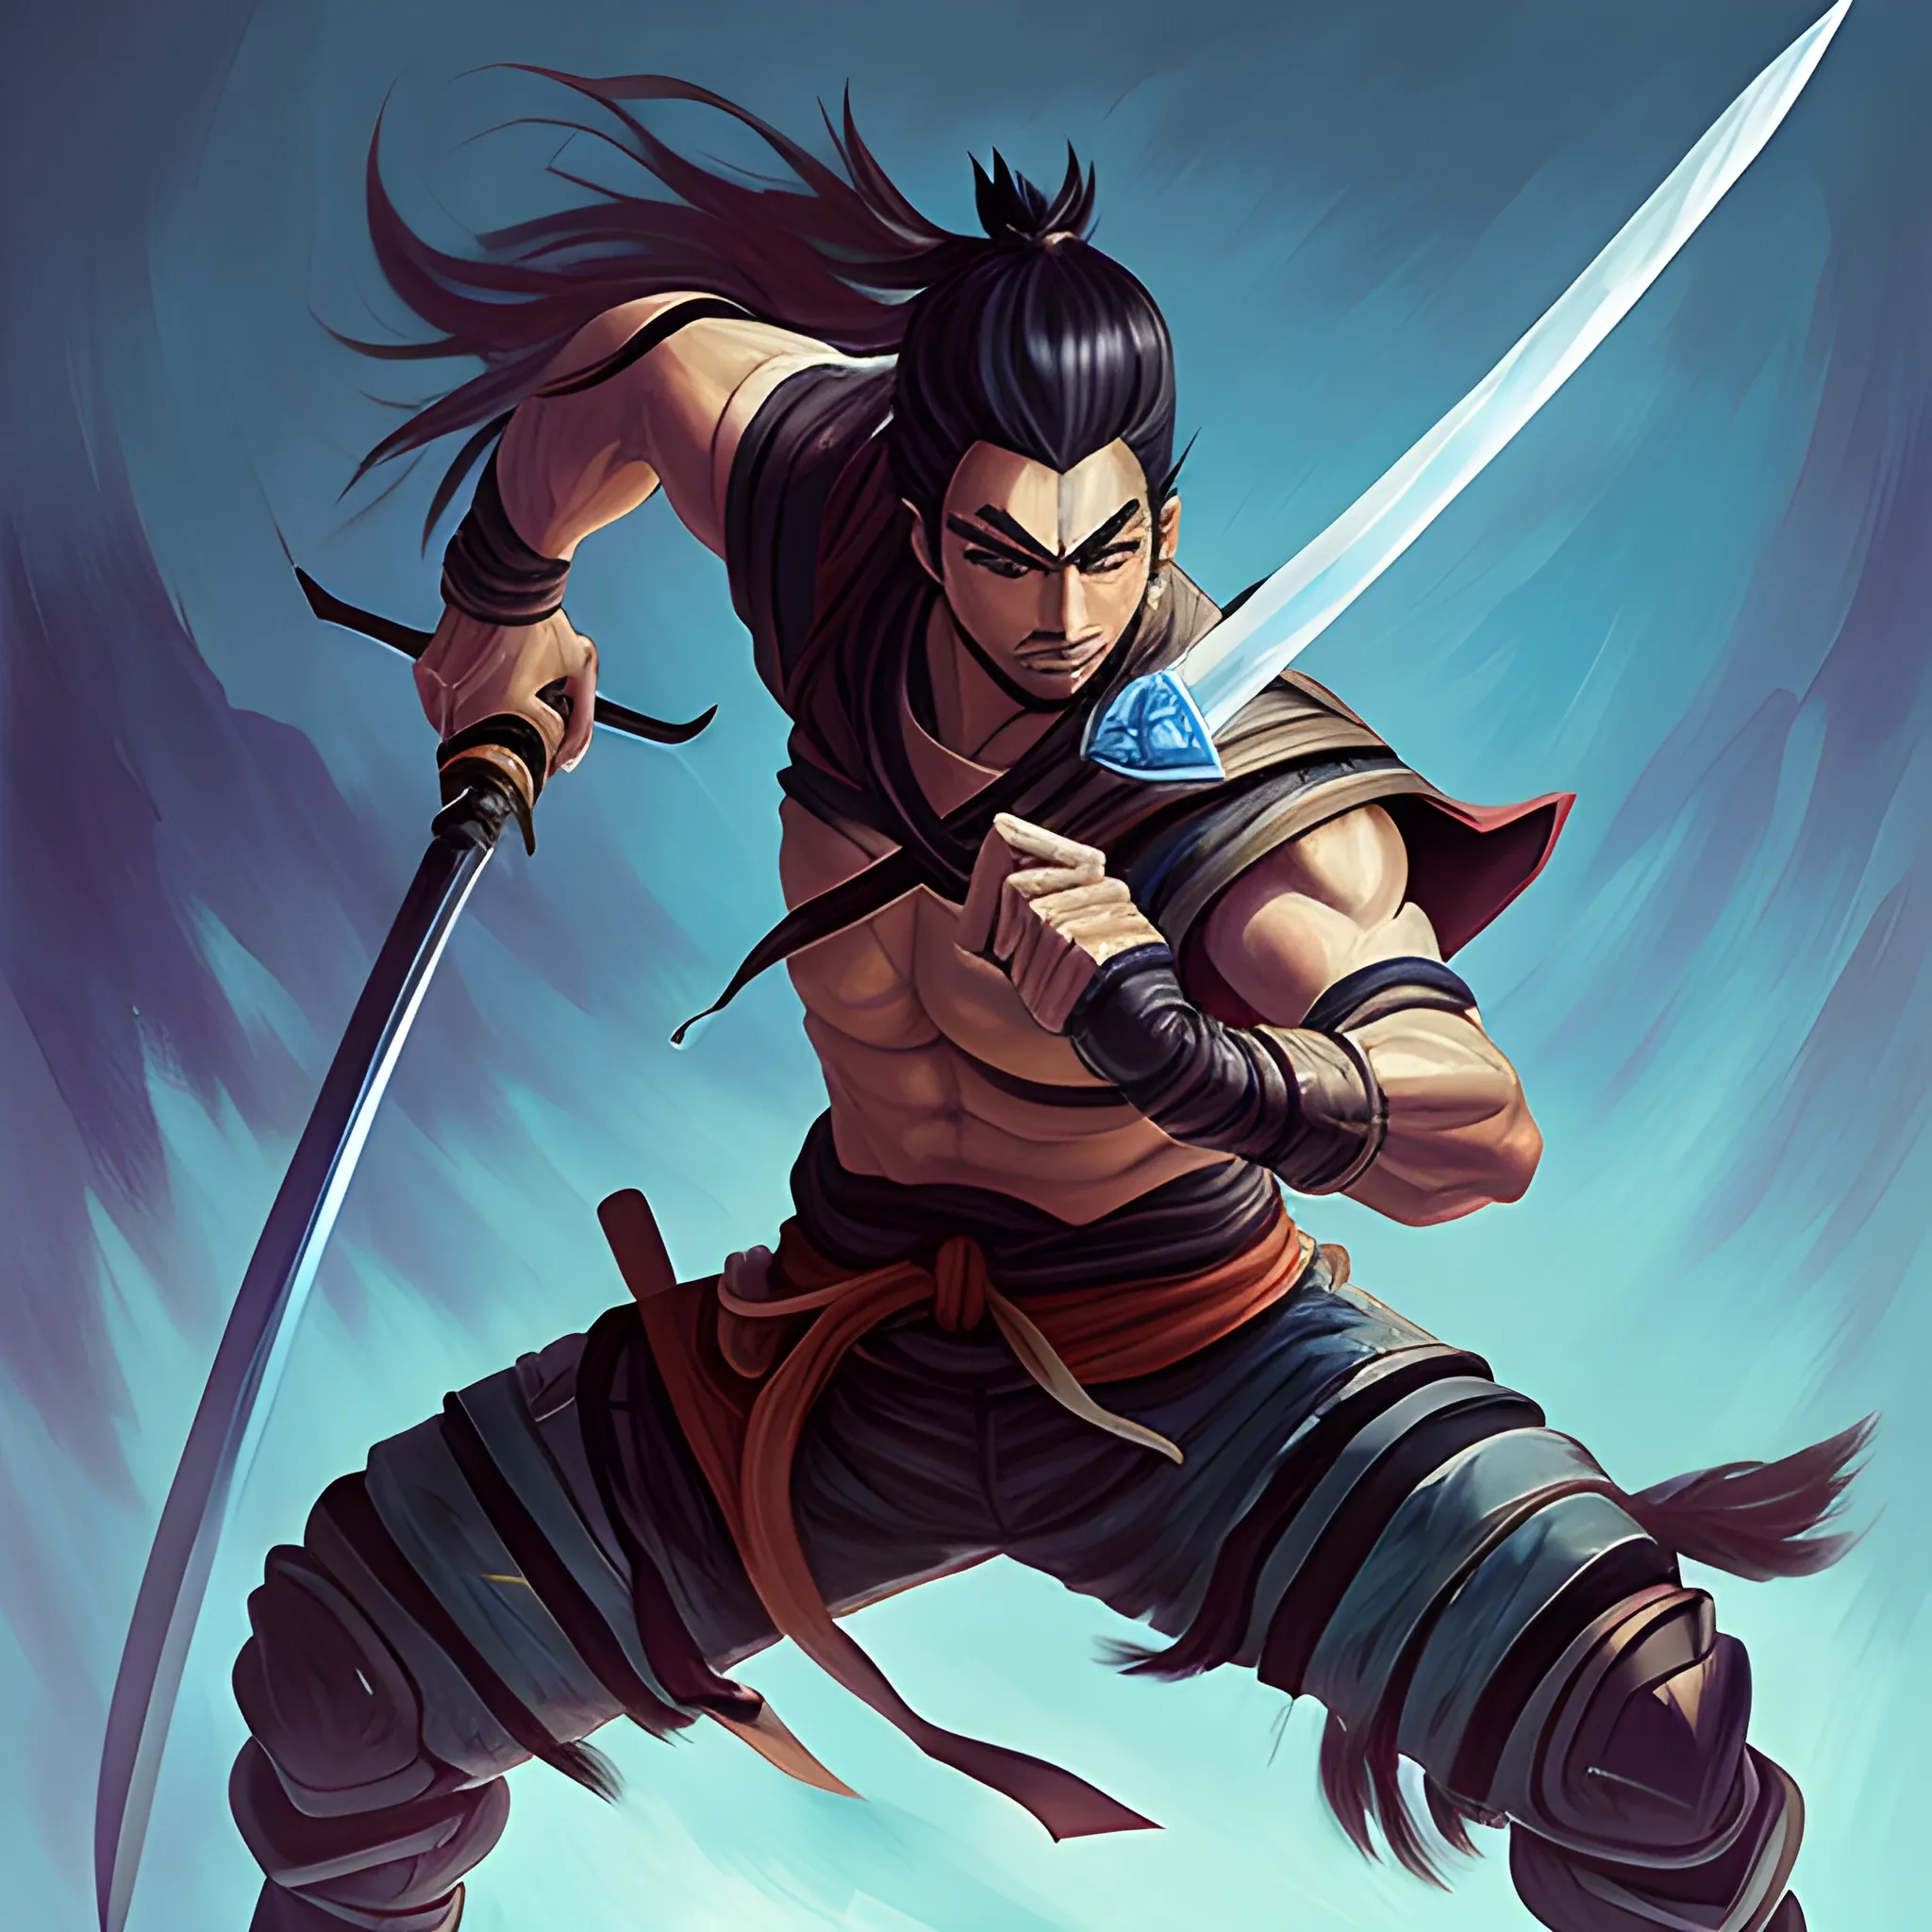 Yasuo is a highly mobile assassin and warrior in League of Legen ...